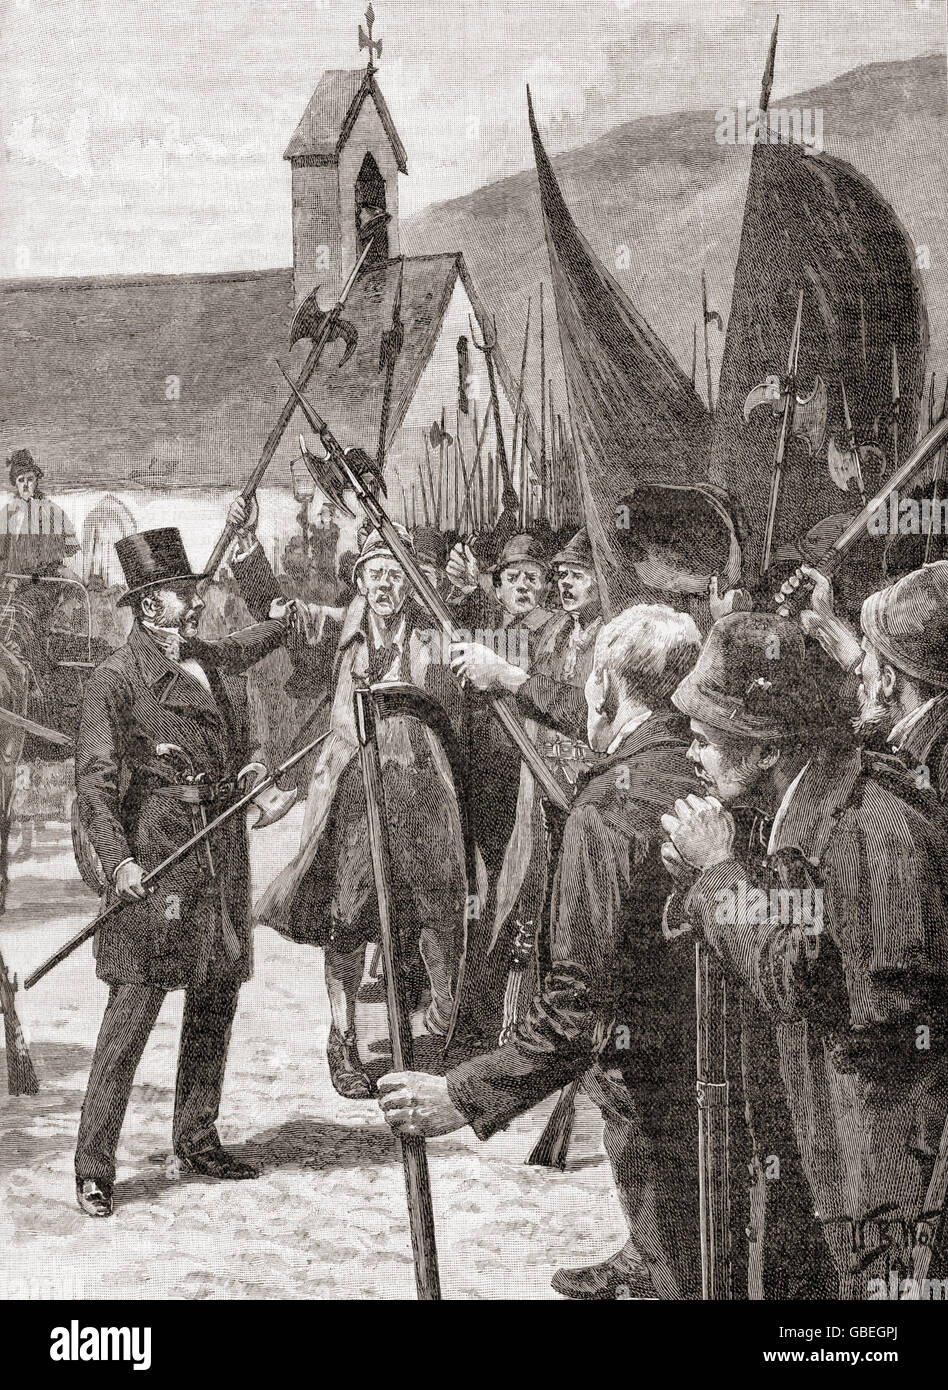 William Smith O'Brien mustering the Irish at Mullinahone, County Tipperary,  Ireland during the Rebellion of 1848.   William Smith O'Brien, 1803 – 1864.  Irish nationalist Member of Parliament and leader of the Young Ireland movement. Stock Photo